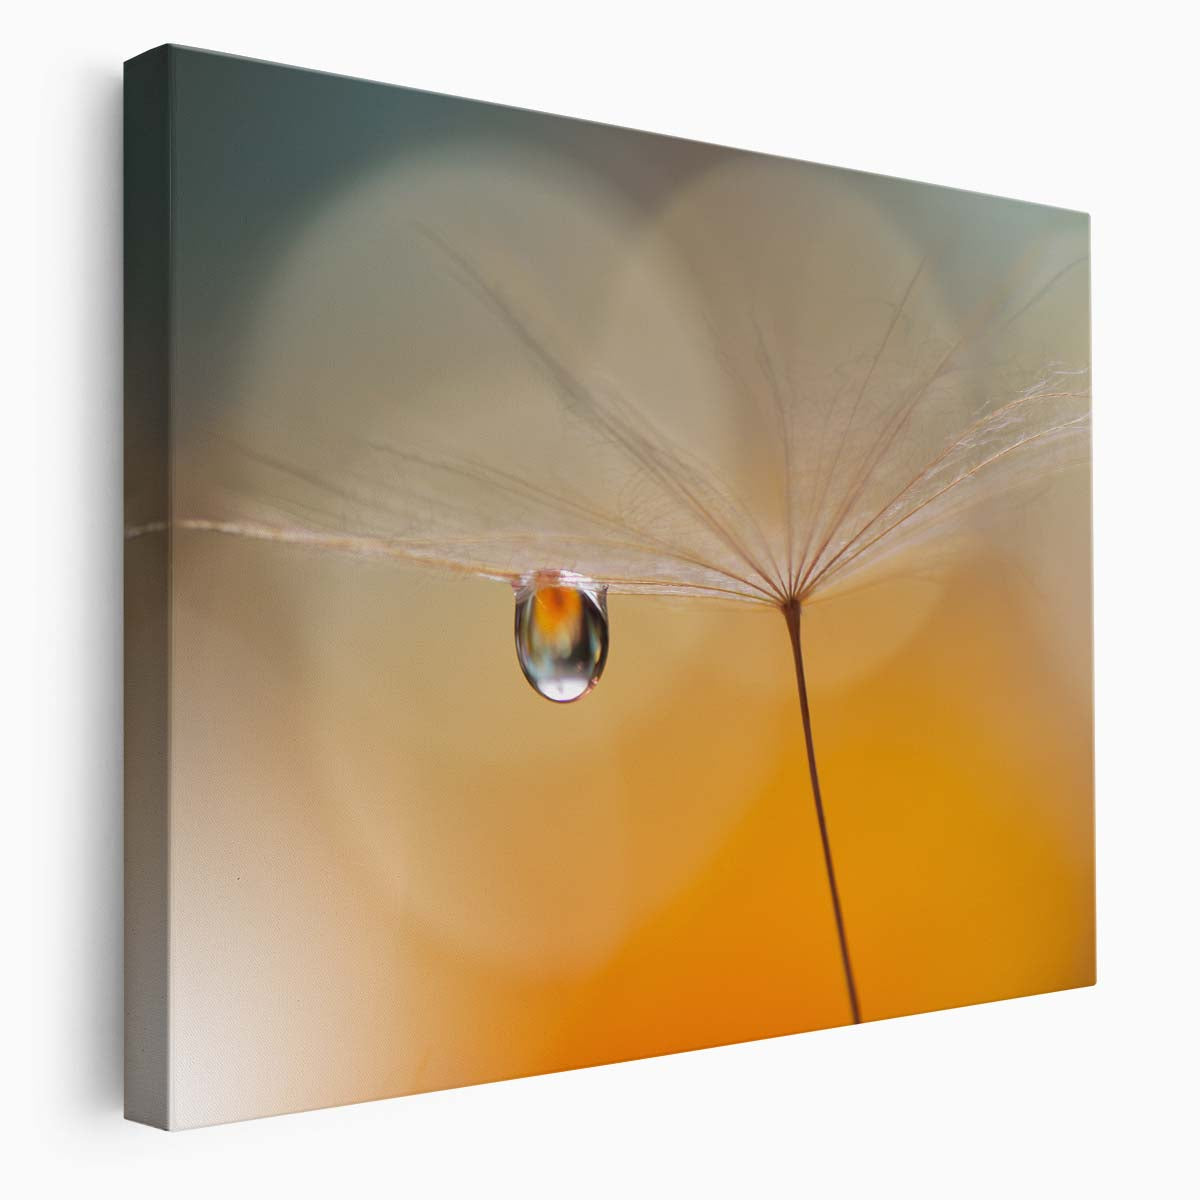 Abstract Macro Dandelion & Feather Drops Wall Art by Luxuriance Designs. Made in USA.